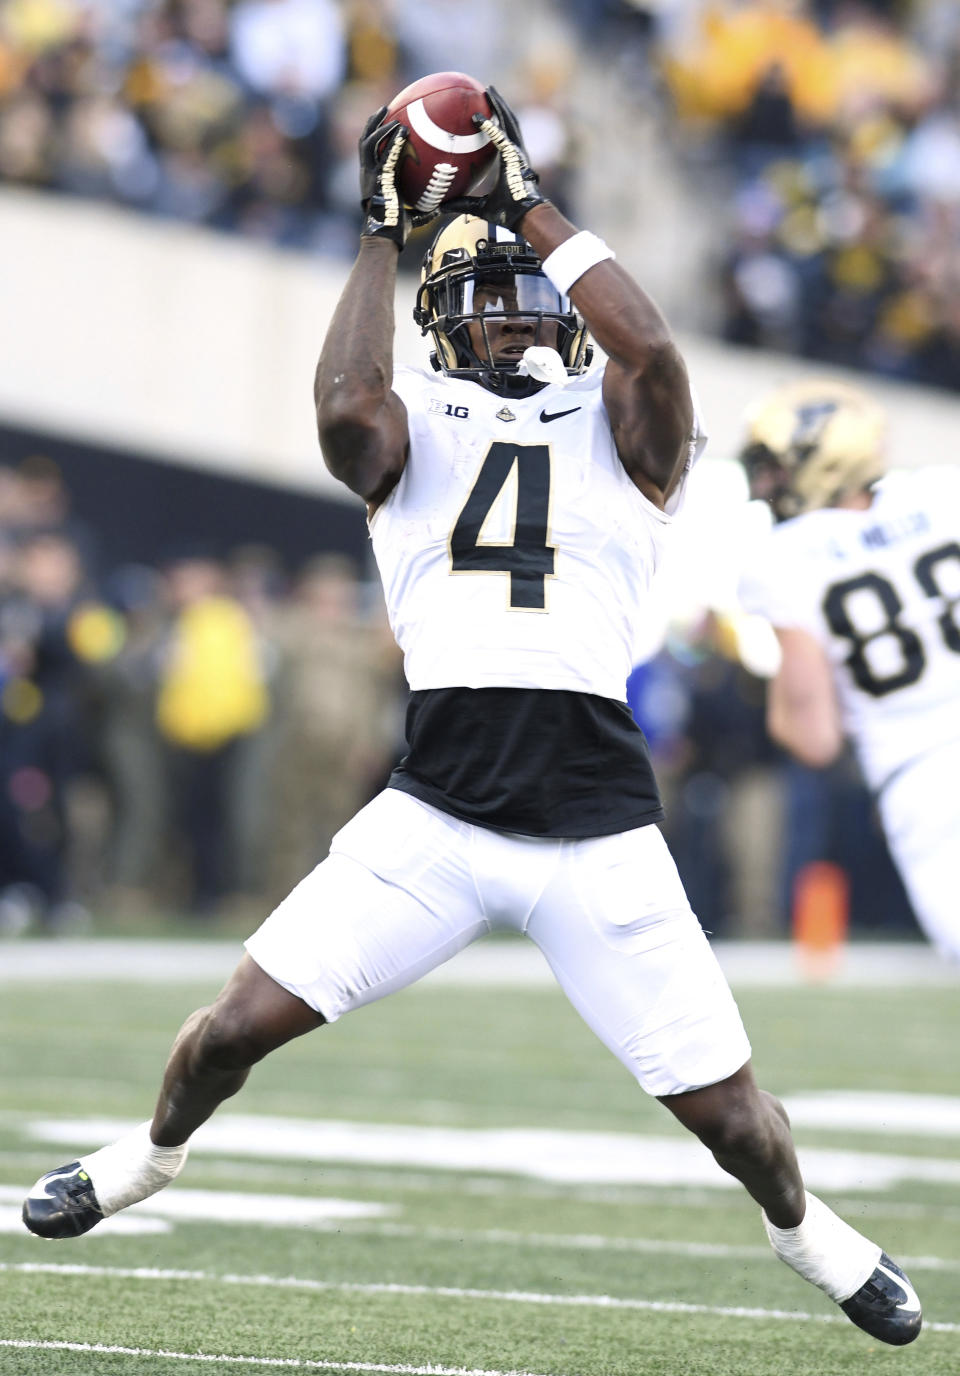 Purdue wide receiver Deion Burks (4) pulls in a pass during the second half of an NCAA college football game against Iowa, Saturday, Oct. 7, 2023, in Iowa City, Iowa. (AP Photo/Cliff Jette)